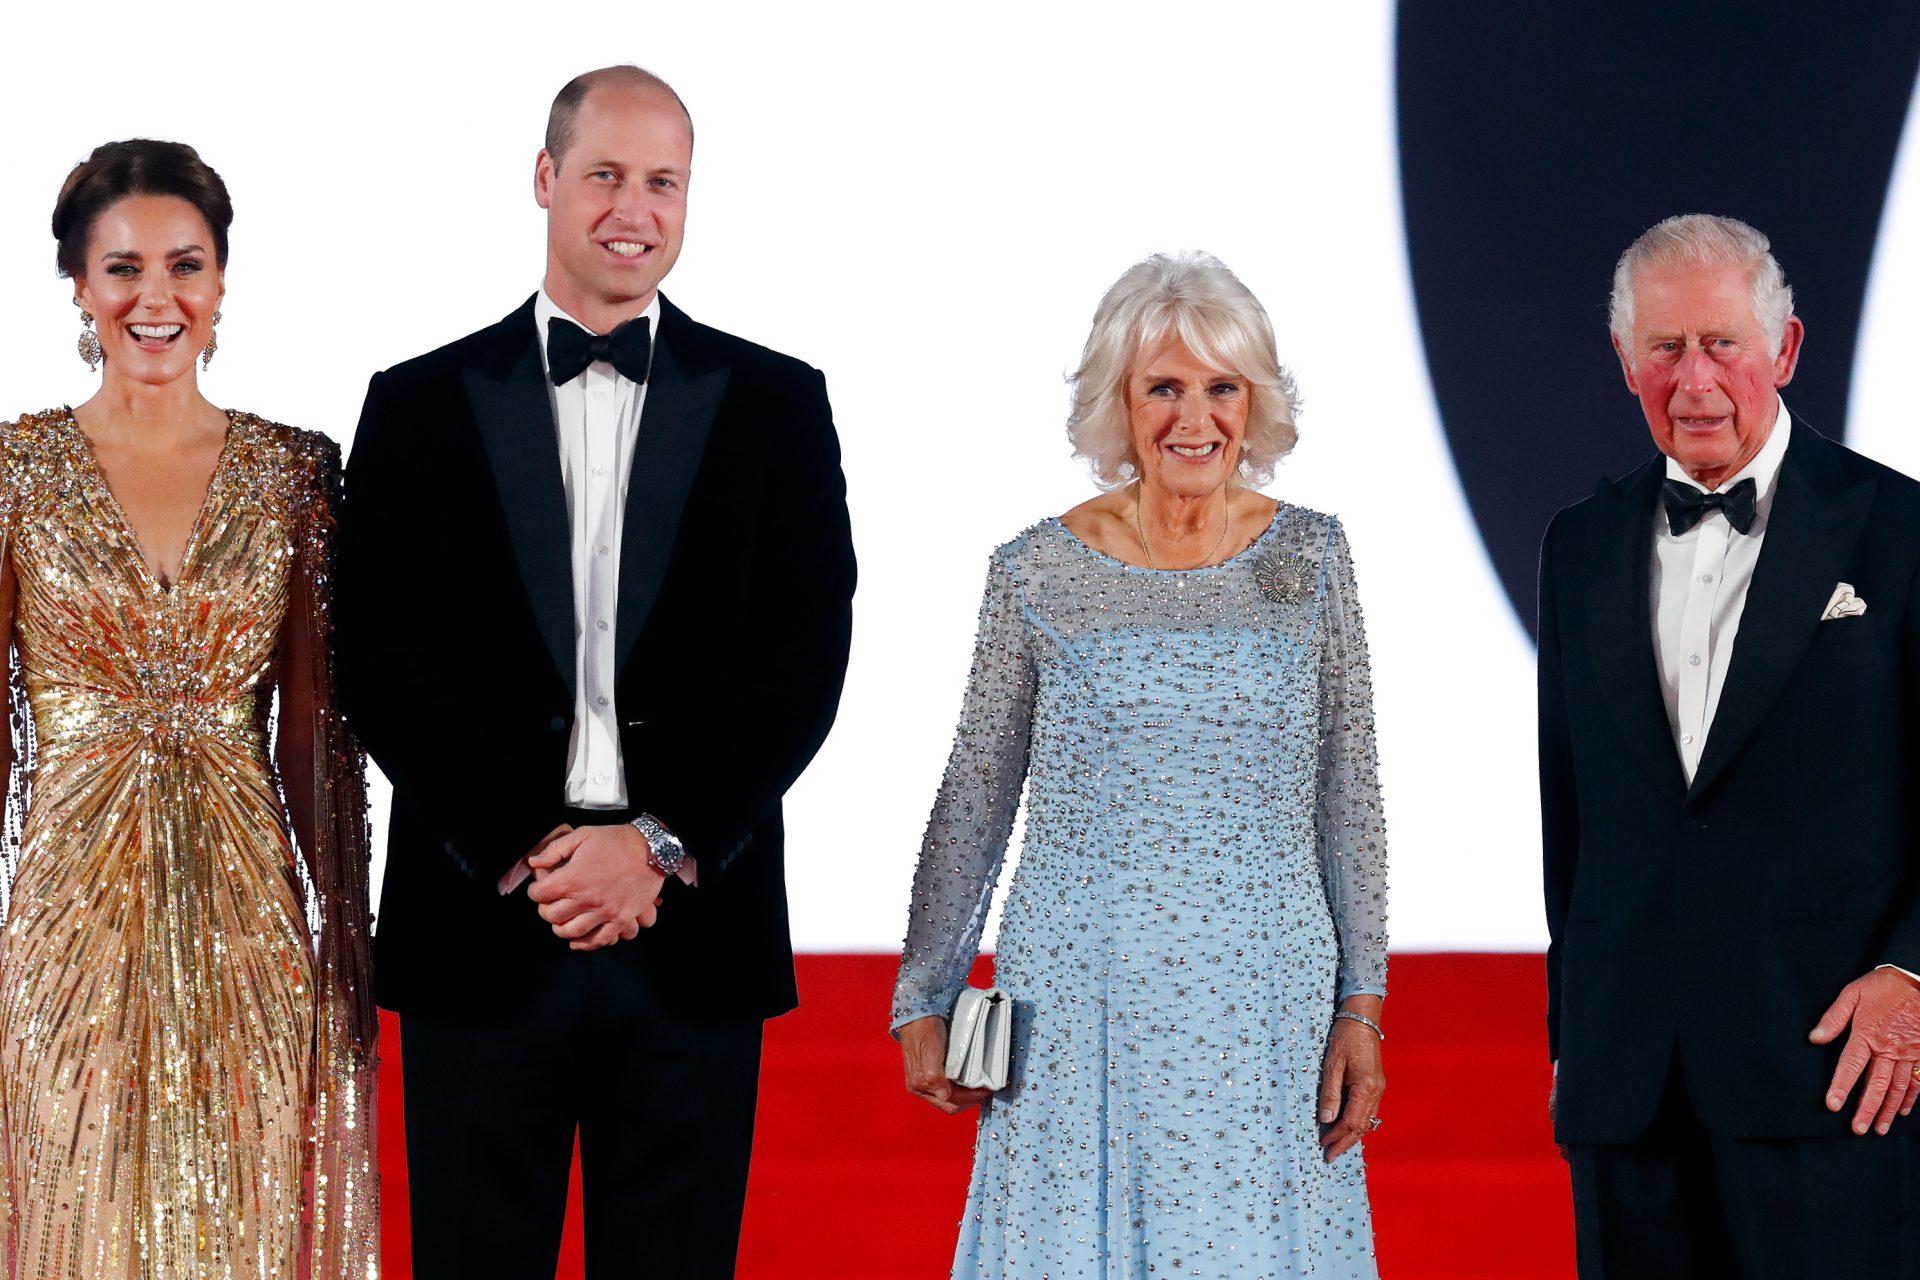 The most photographed royal family in the world 